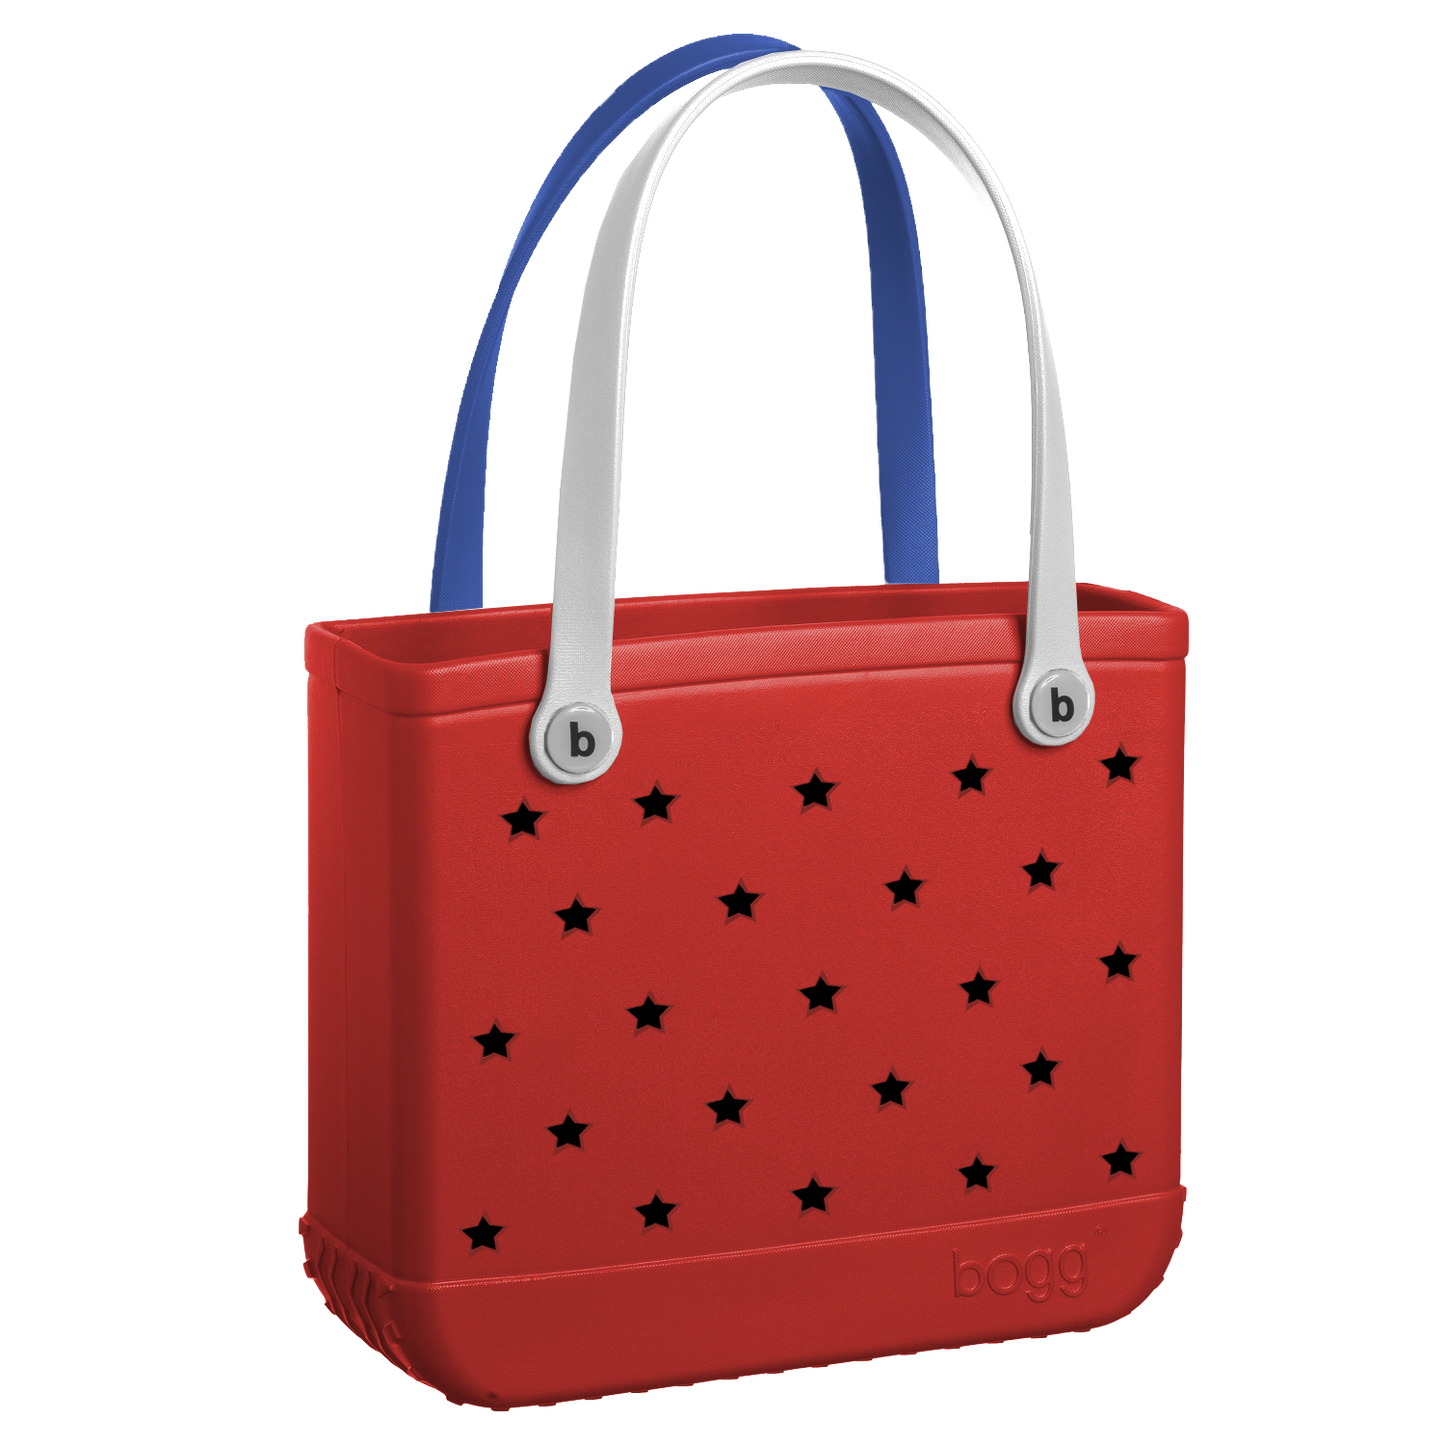 Baby Bogg® Bag - STARS and stripes